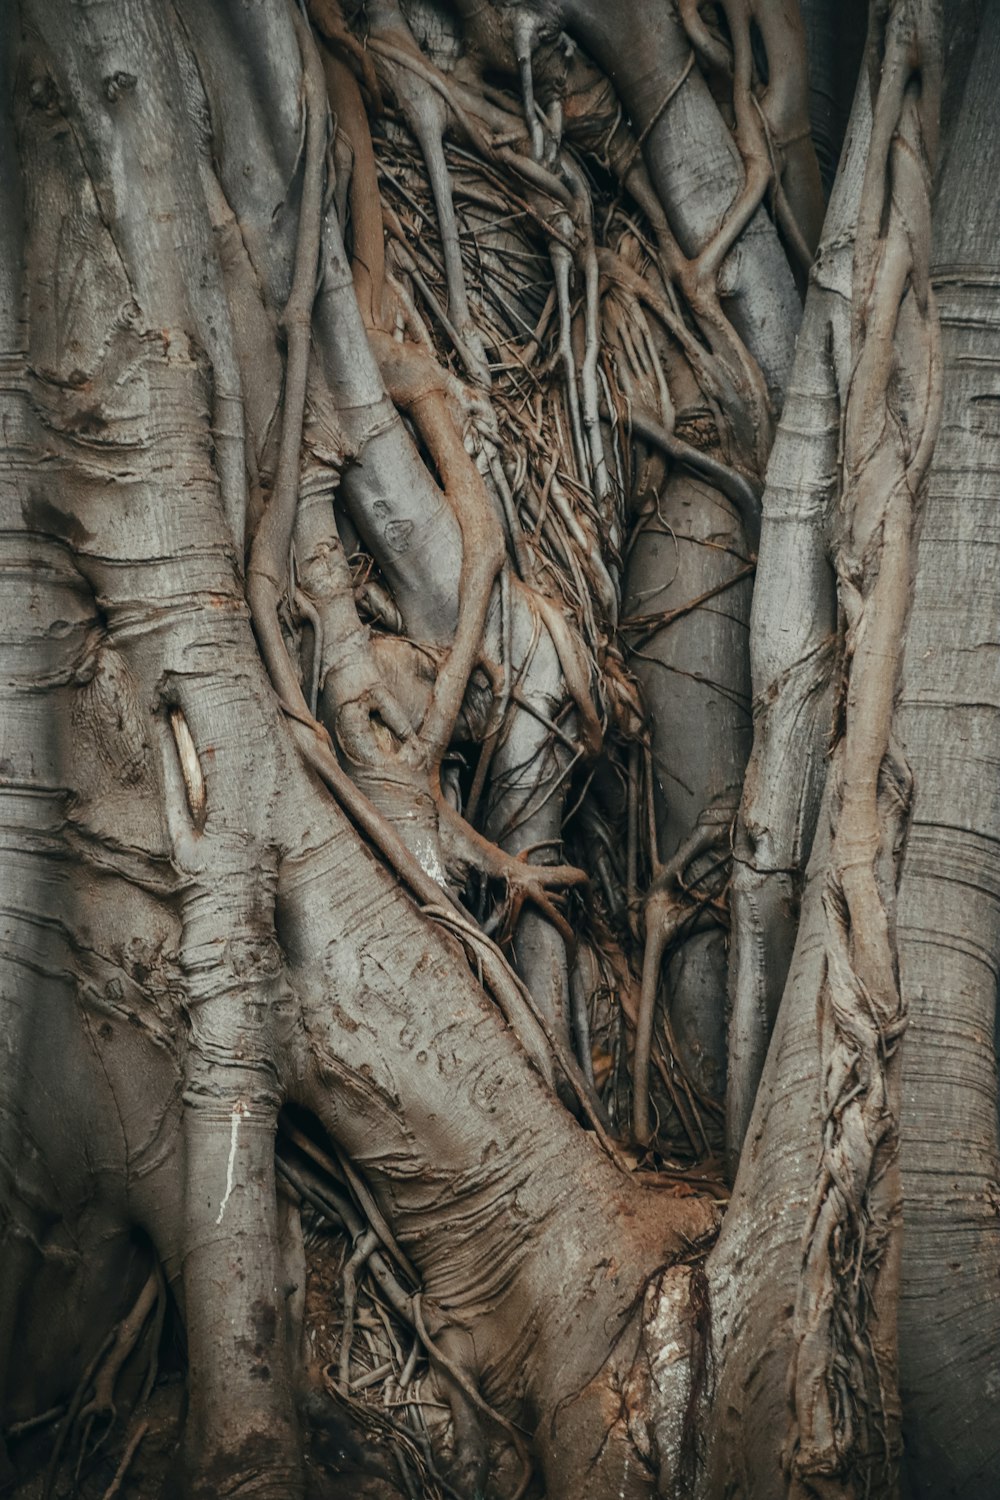 the roots of a large tree are exposed